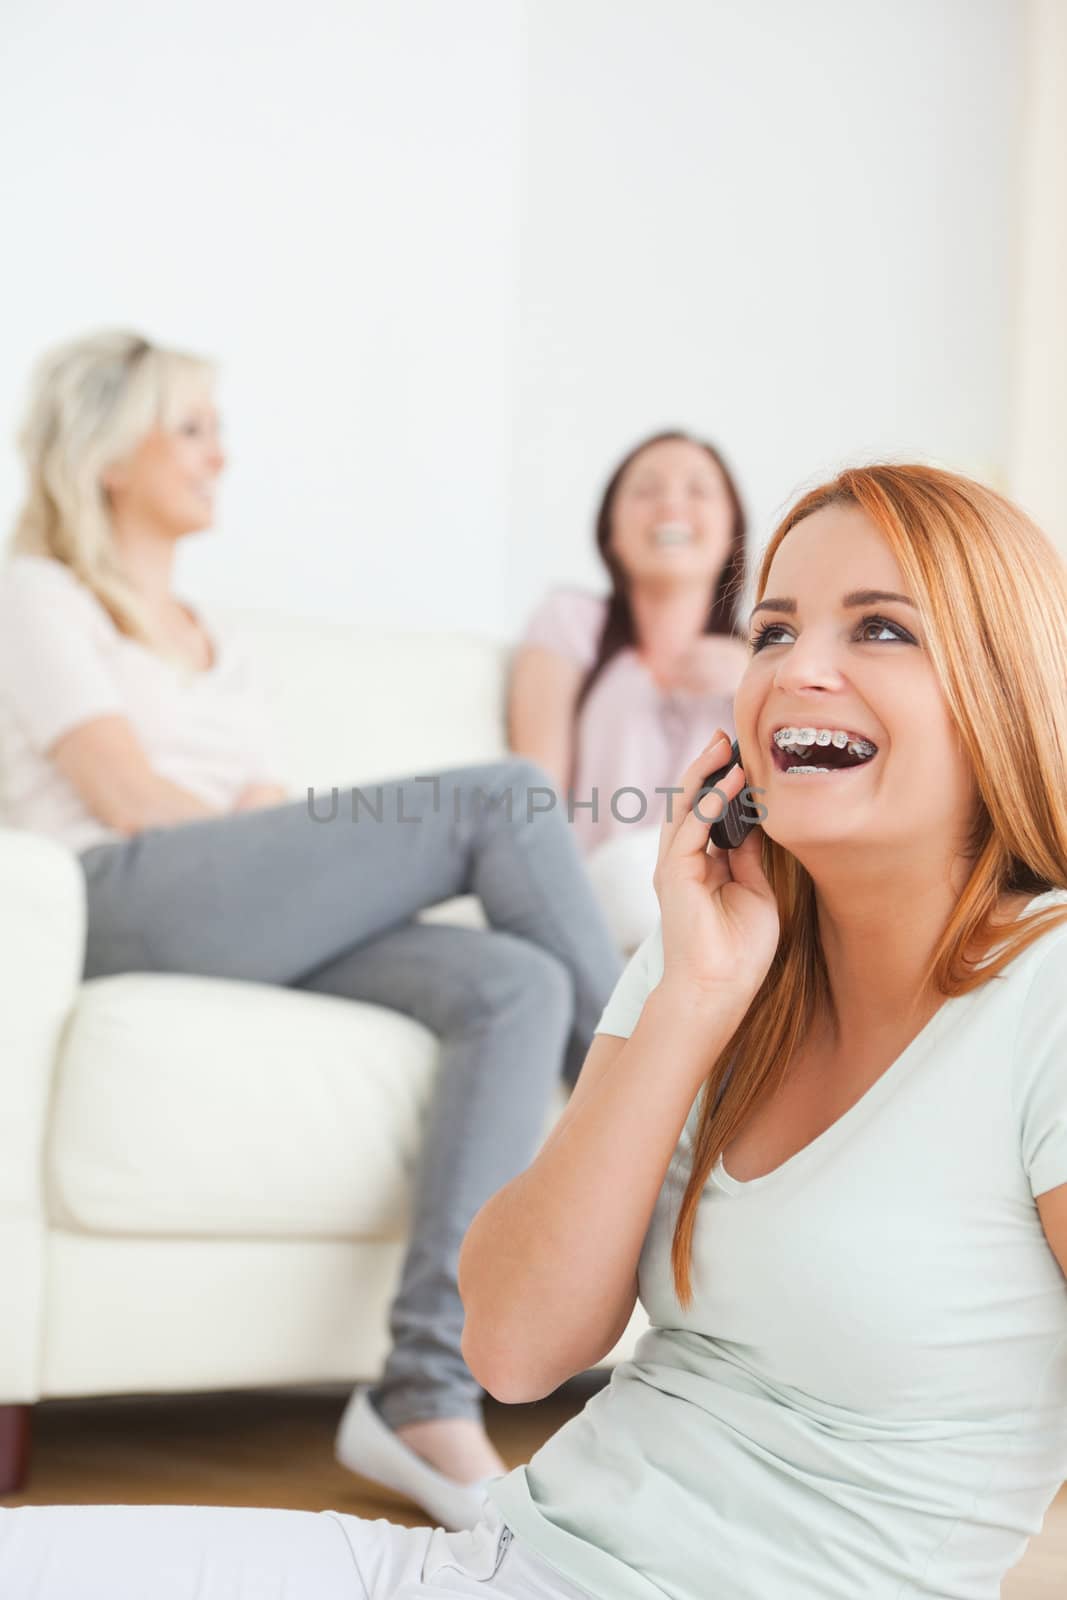 Laughing woman with a cellphone separated from the others by Wavebreakmedia